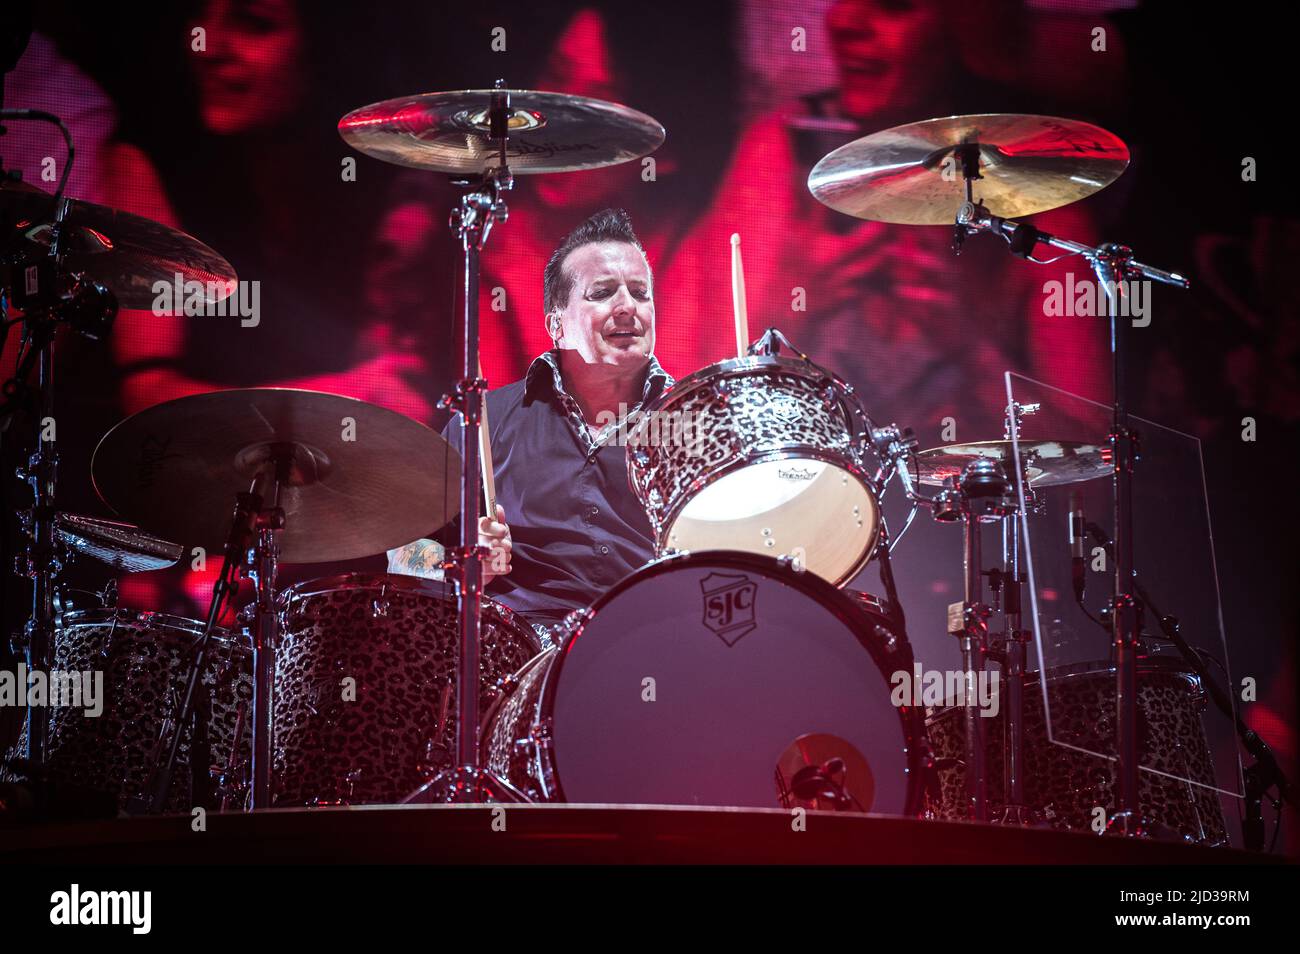 ITALY, MILAN, JUNE 15TH 2022: Tre Cool, drummer of the American punk rock band GREEN DAY preforms live on stage at Ippodromo SNAI La Maura during the 'I-Days Festival 2022' Stock Photo